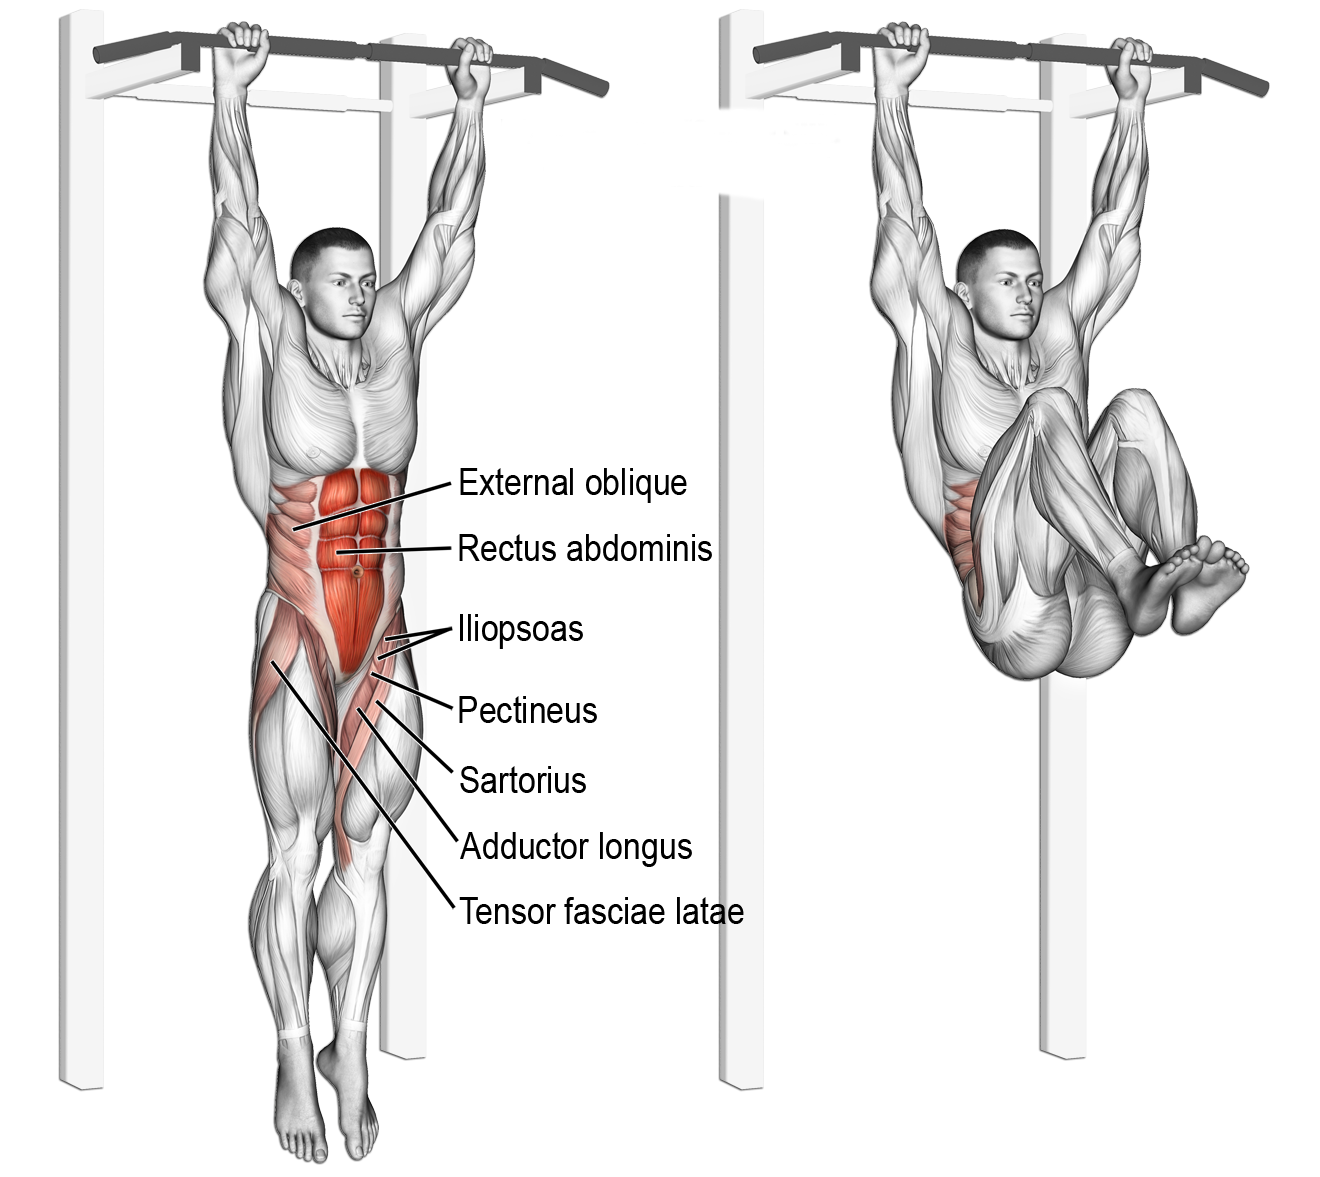 Hanging leg and hip raise exercise